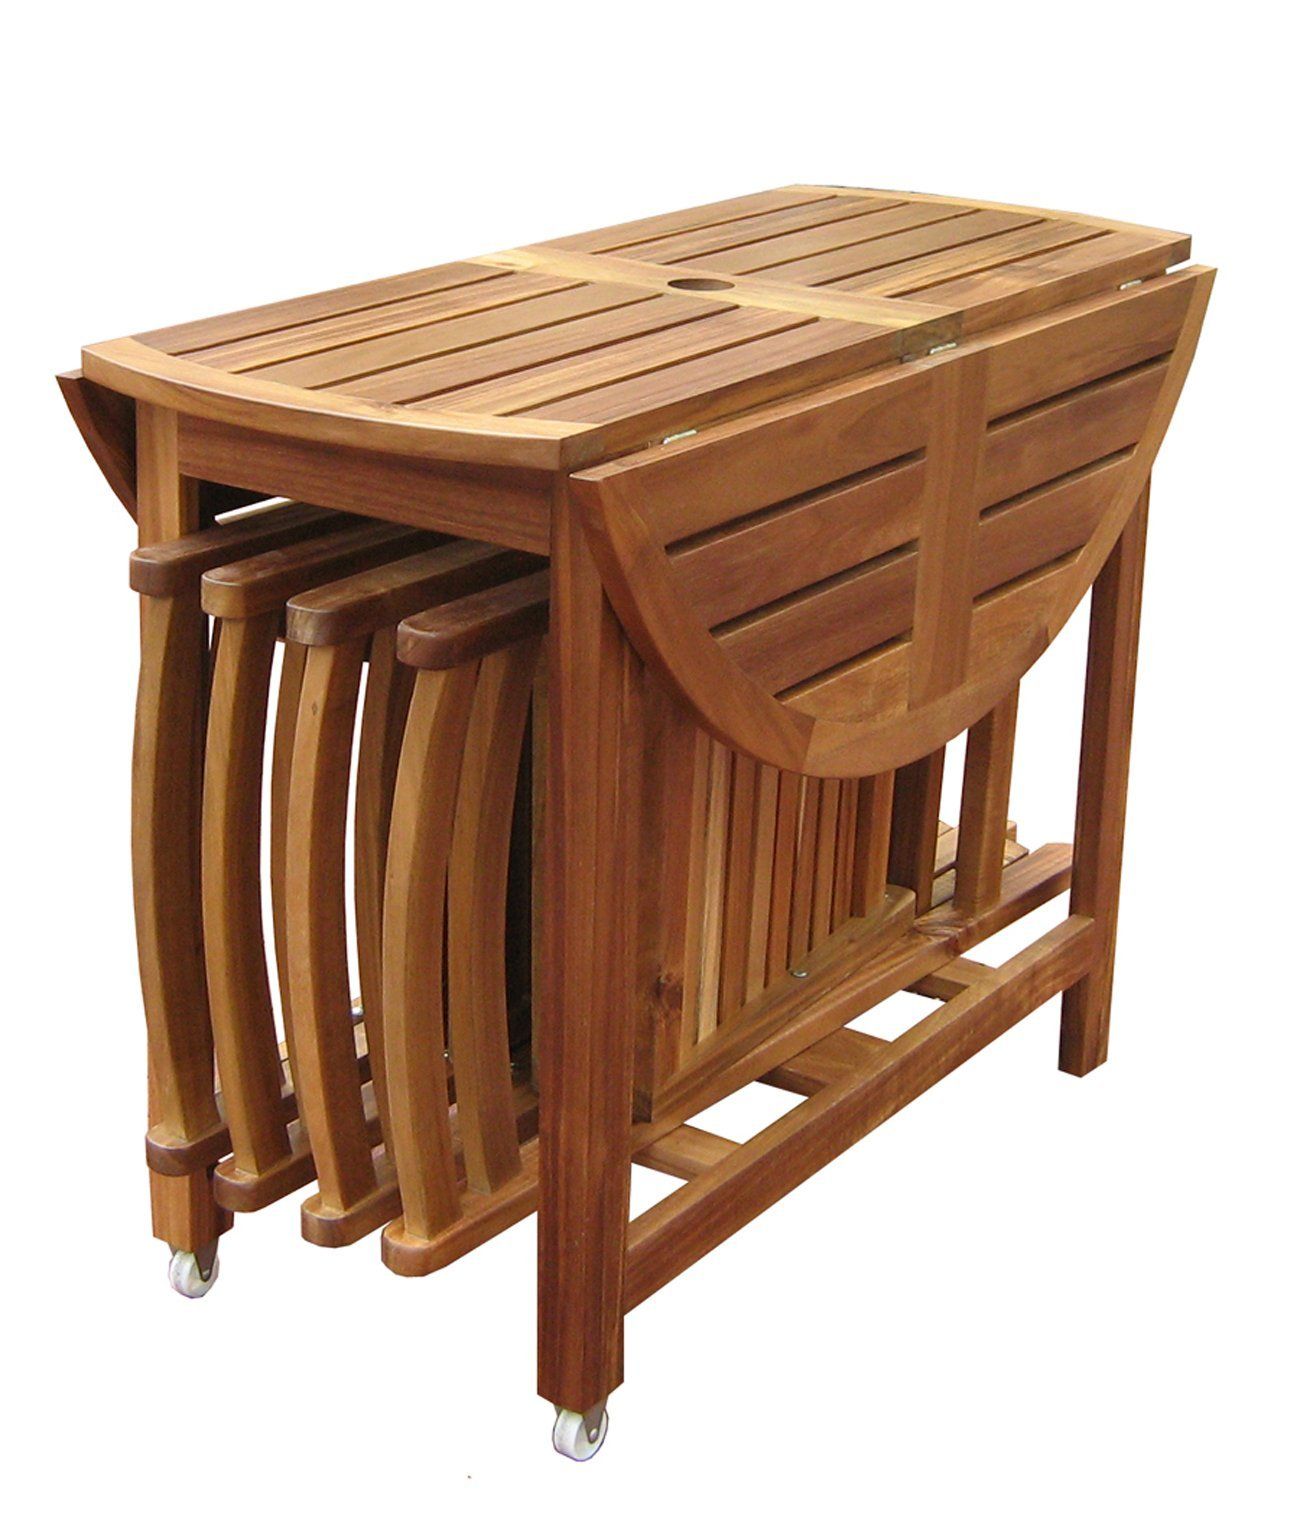 Outdoor Folding Table And Chairs